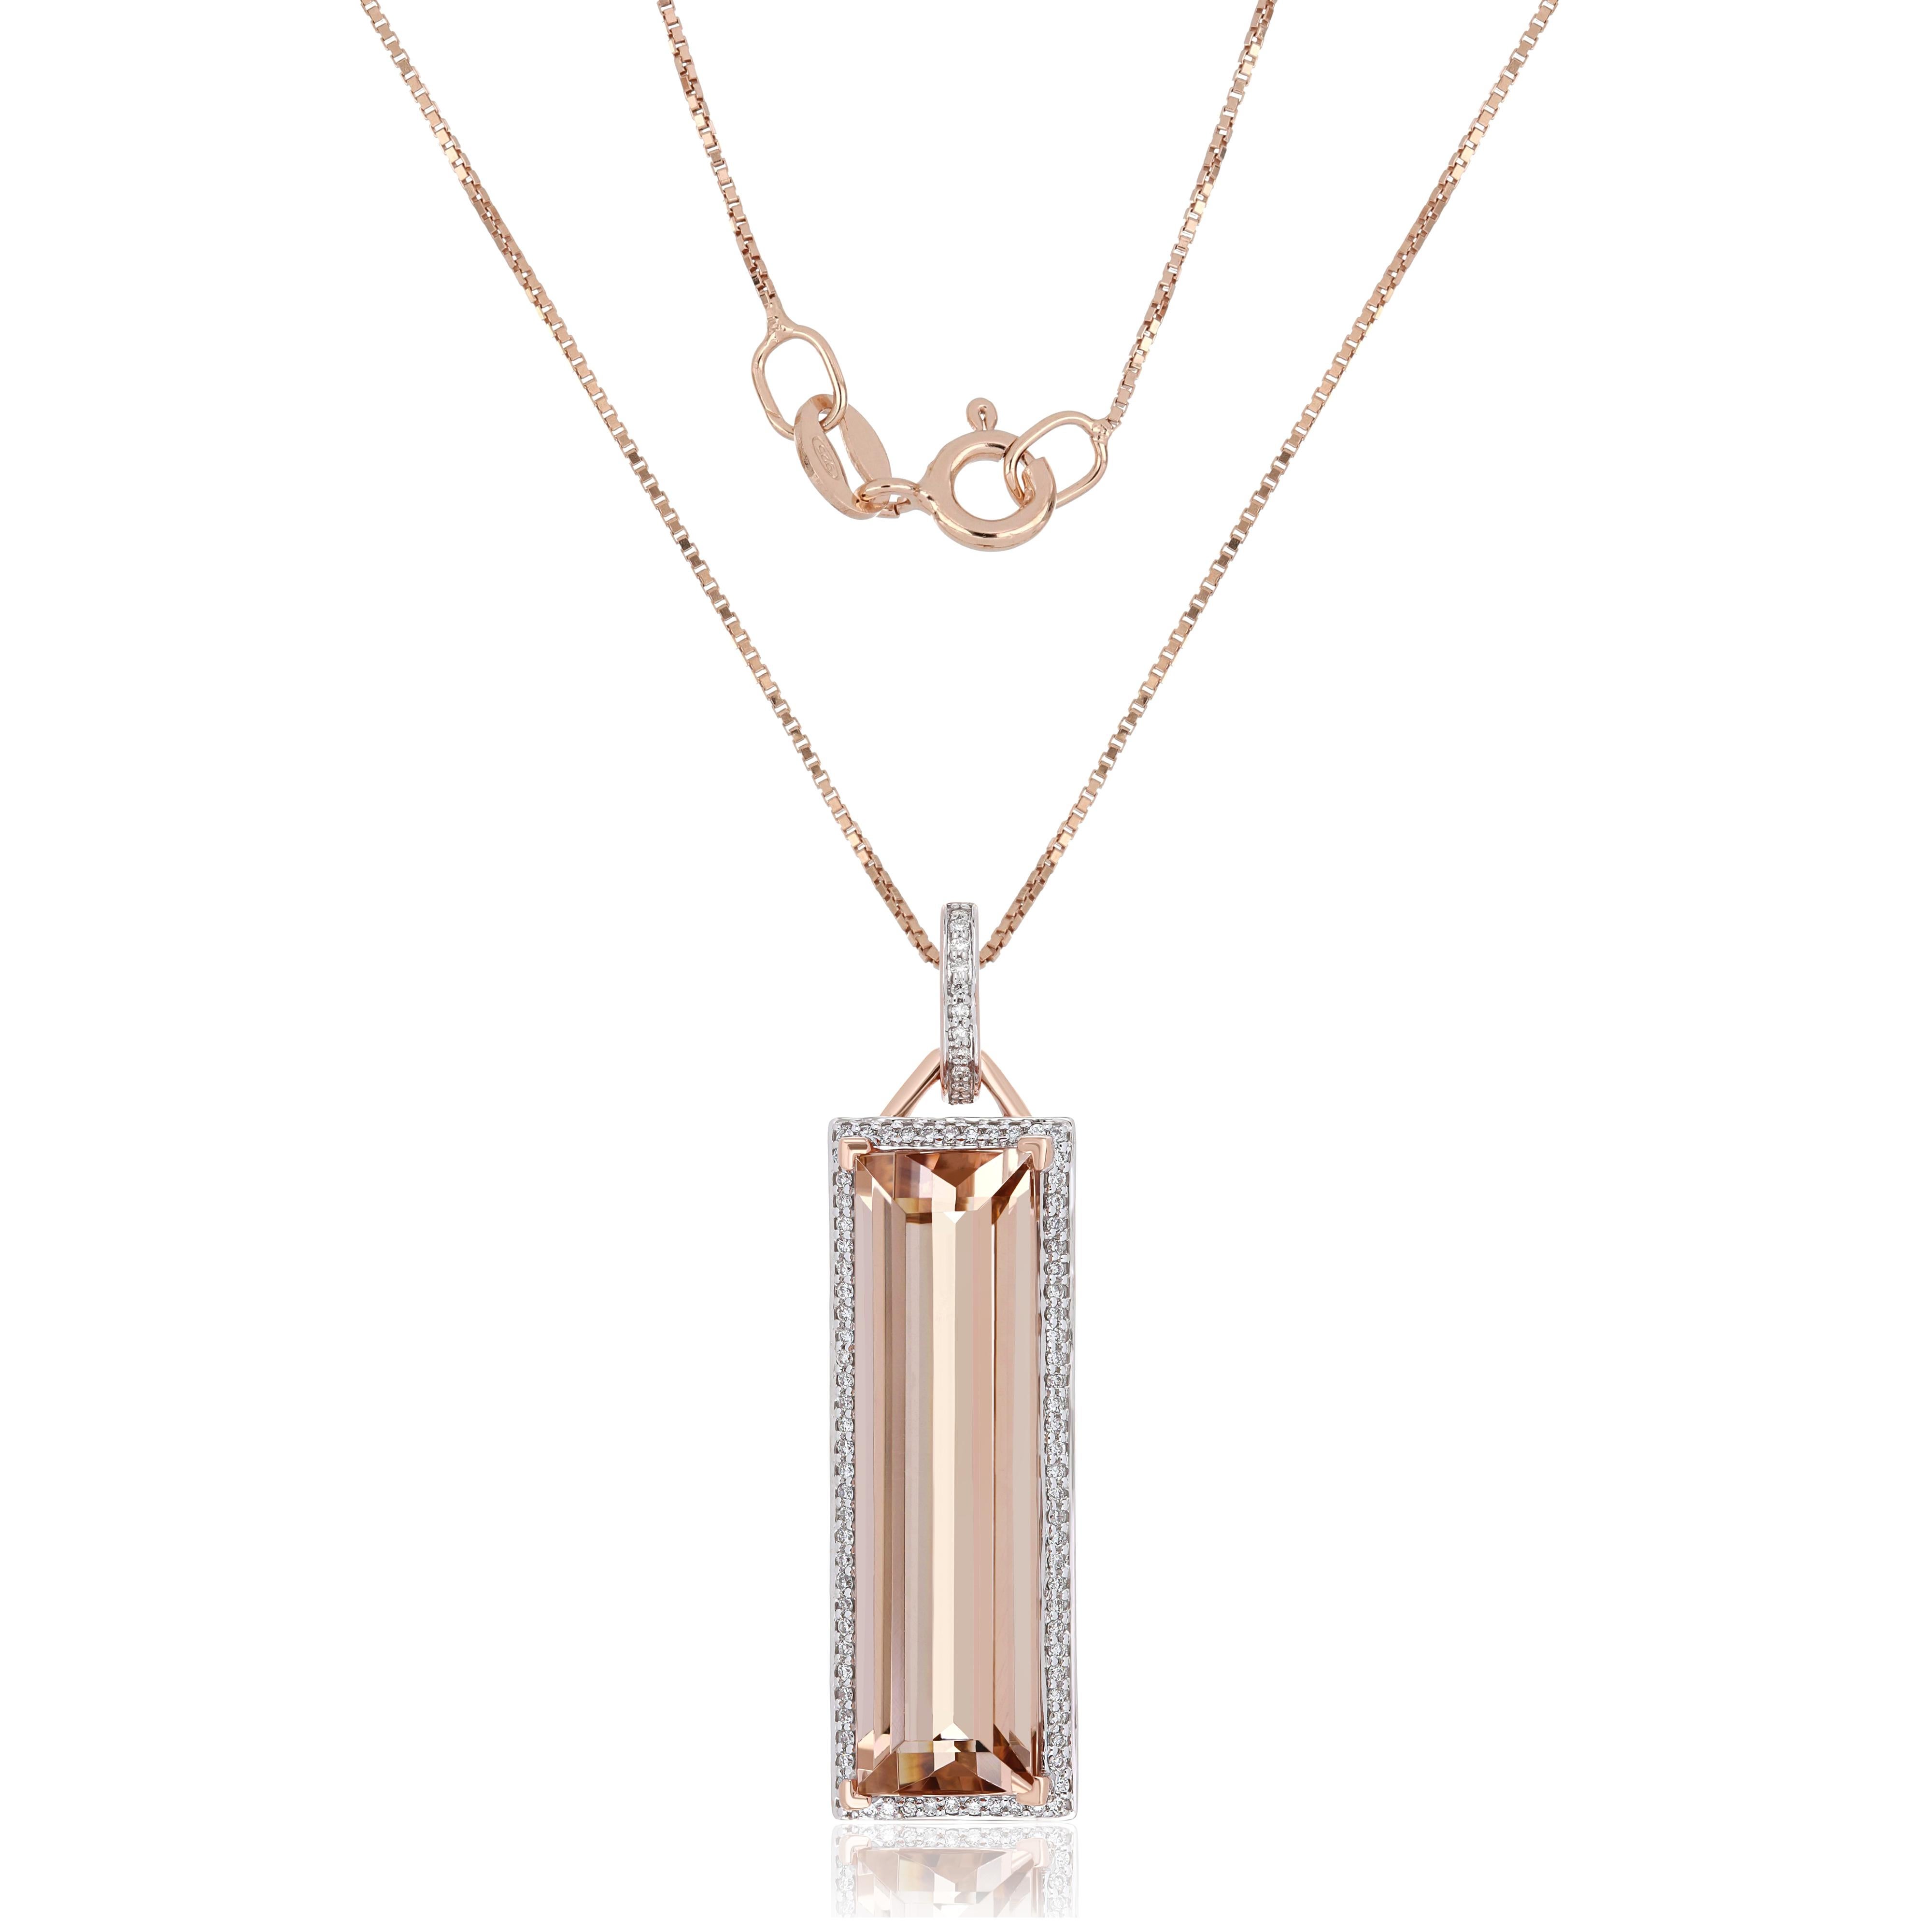 Elegant and exquisitely detailed Cocktail 14K Pendant, center set with 12.65 Cts. (approx) Elongated Octagon Cut Morganite. Surrounded with Diamonds, weighing approx. 0.23 ct. Beautifully Hand crafted in 14 Karat Rose Gold.

Stone Size:
Morganite: